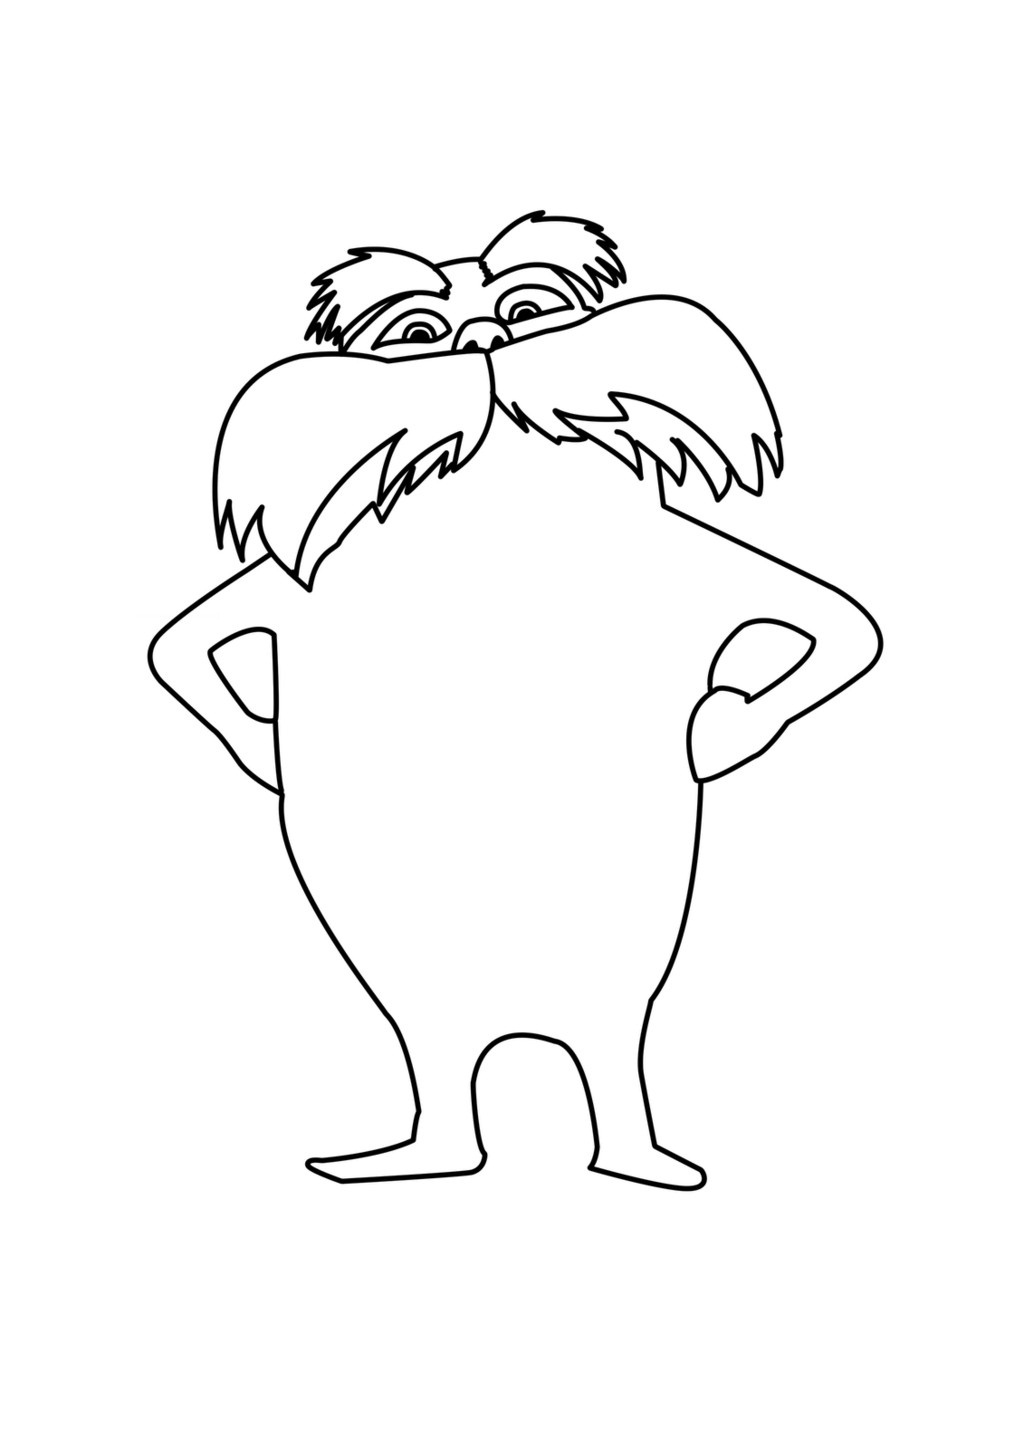 Lorax Coloring Page